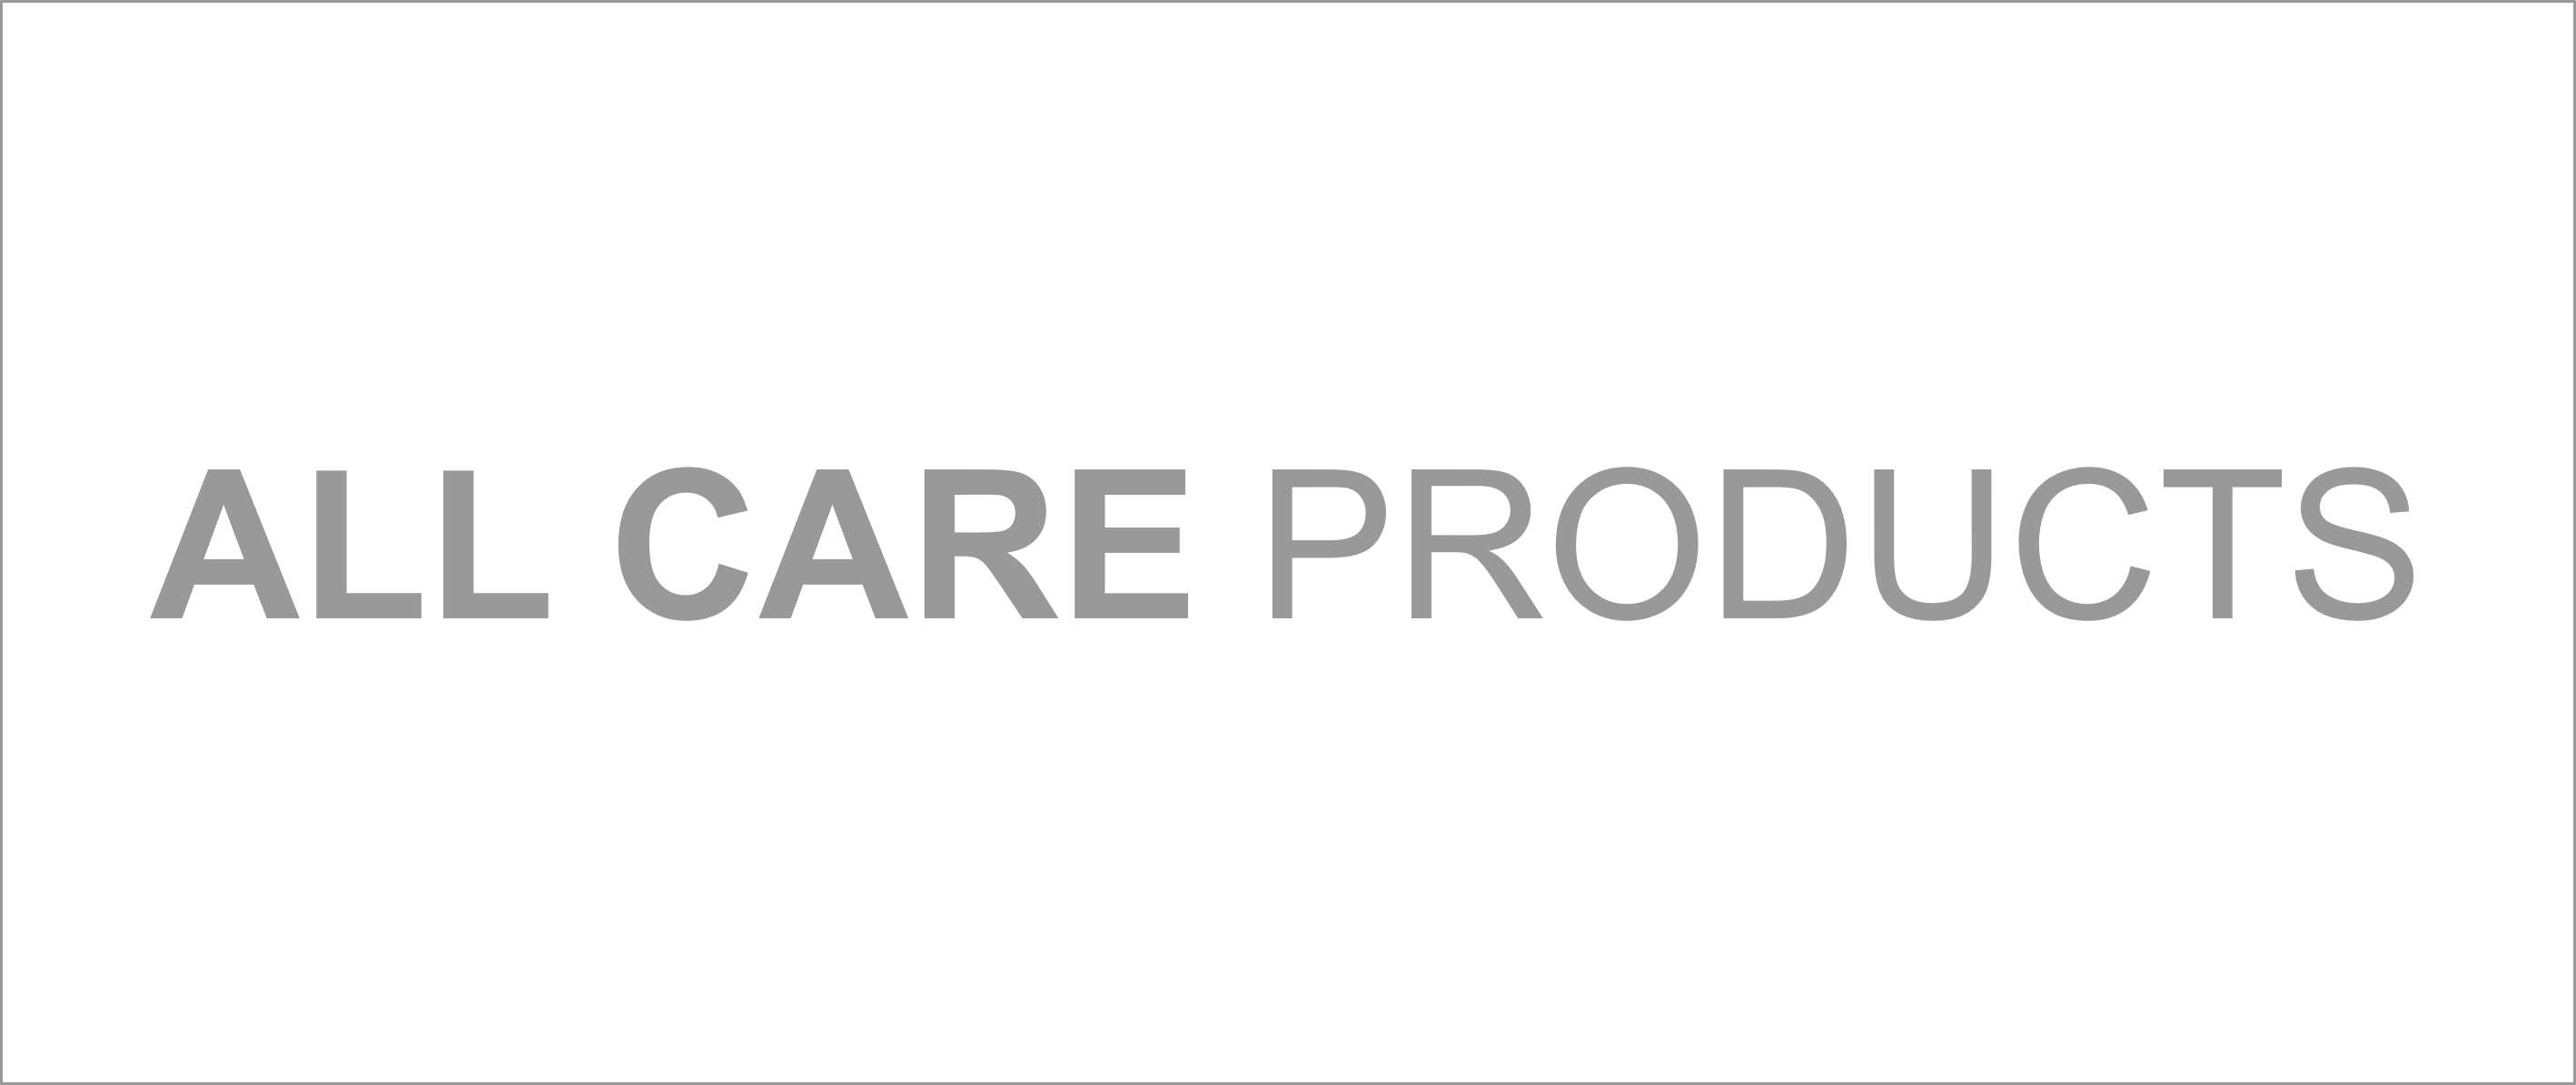 All Care Products